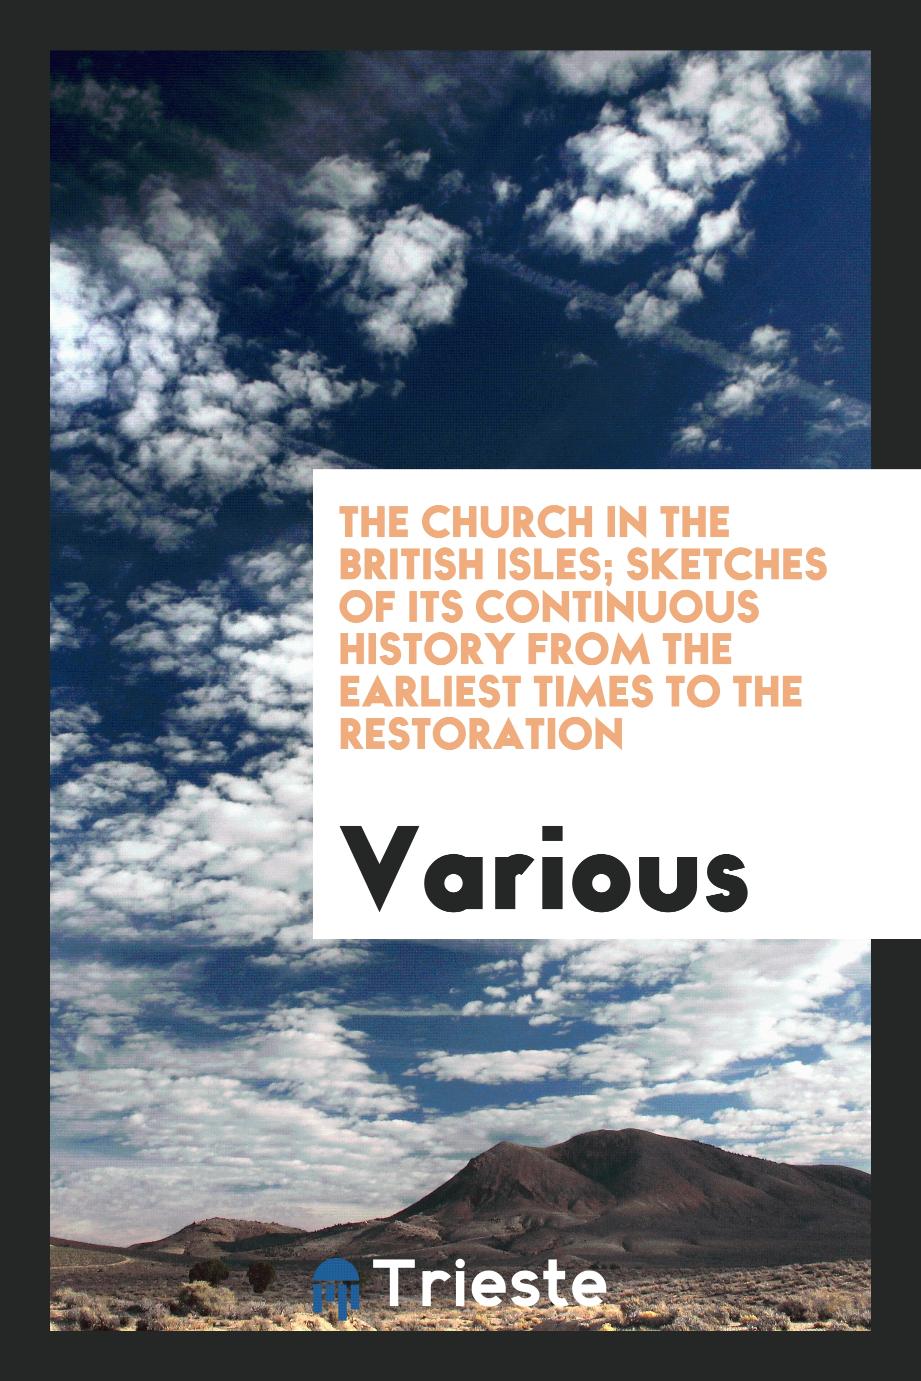 The church in the British Isles; sketches of its continuous history from the earliest times to the restoration